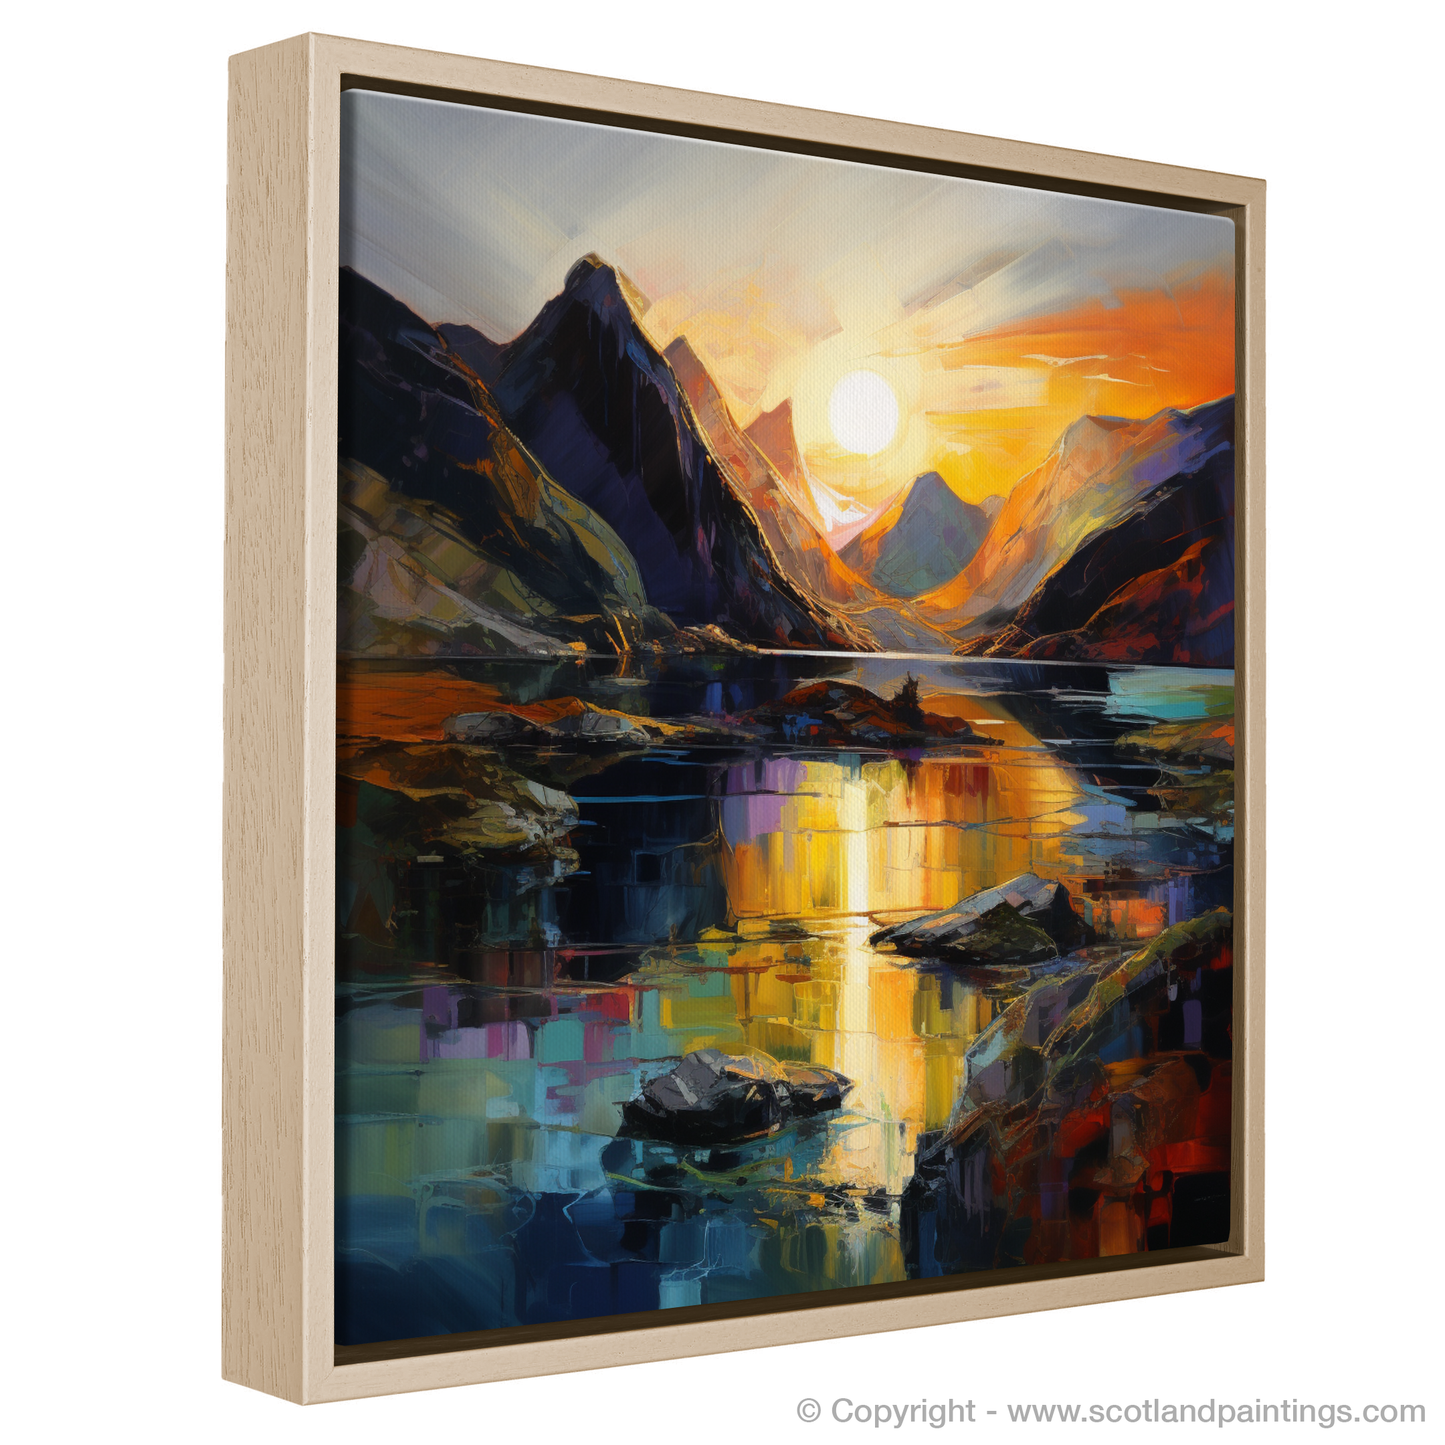 Painting and Art Print of Loch Coruisk at sunset entitled "Sunset Sonata over Loch Coruisk".